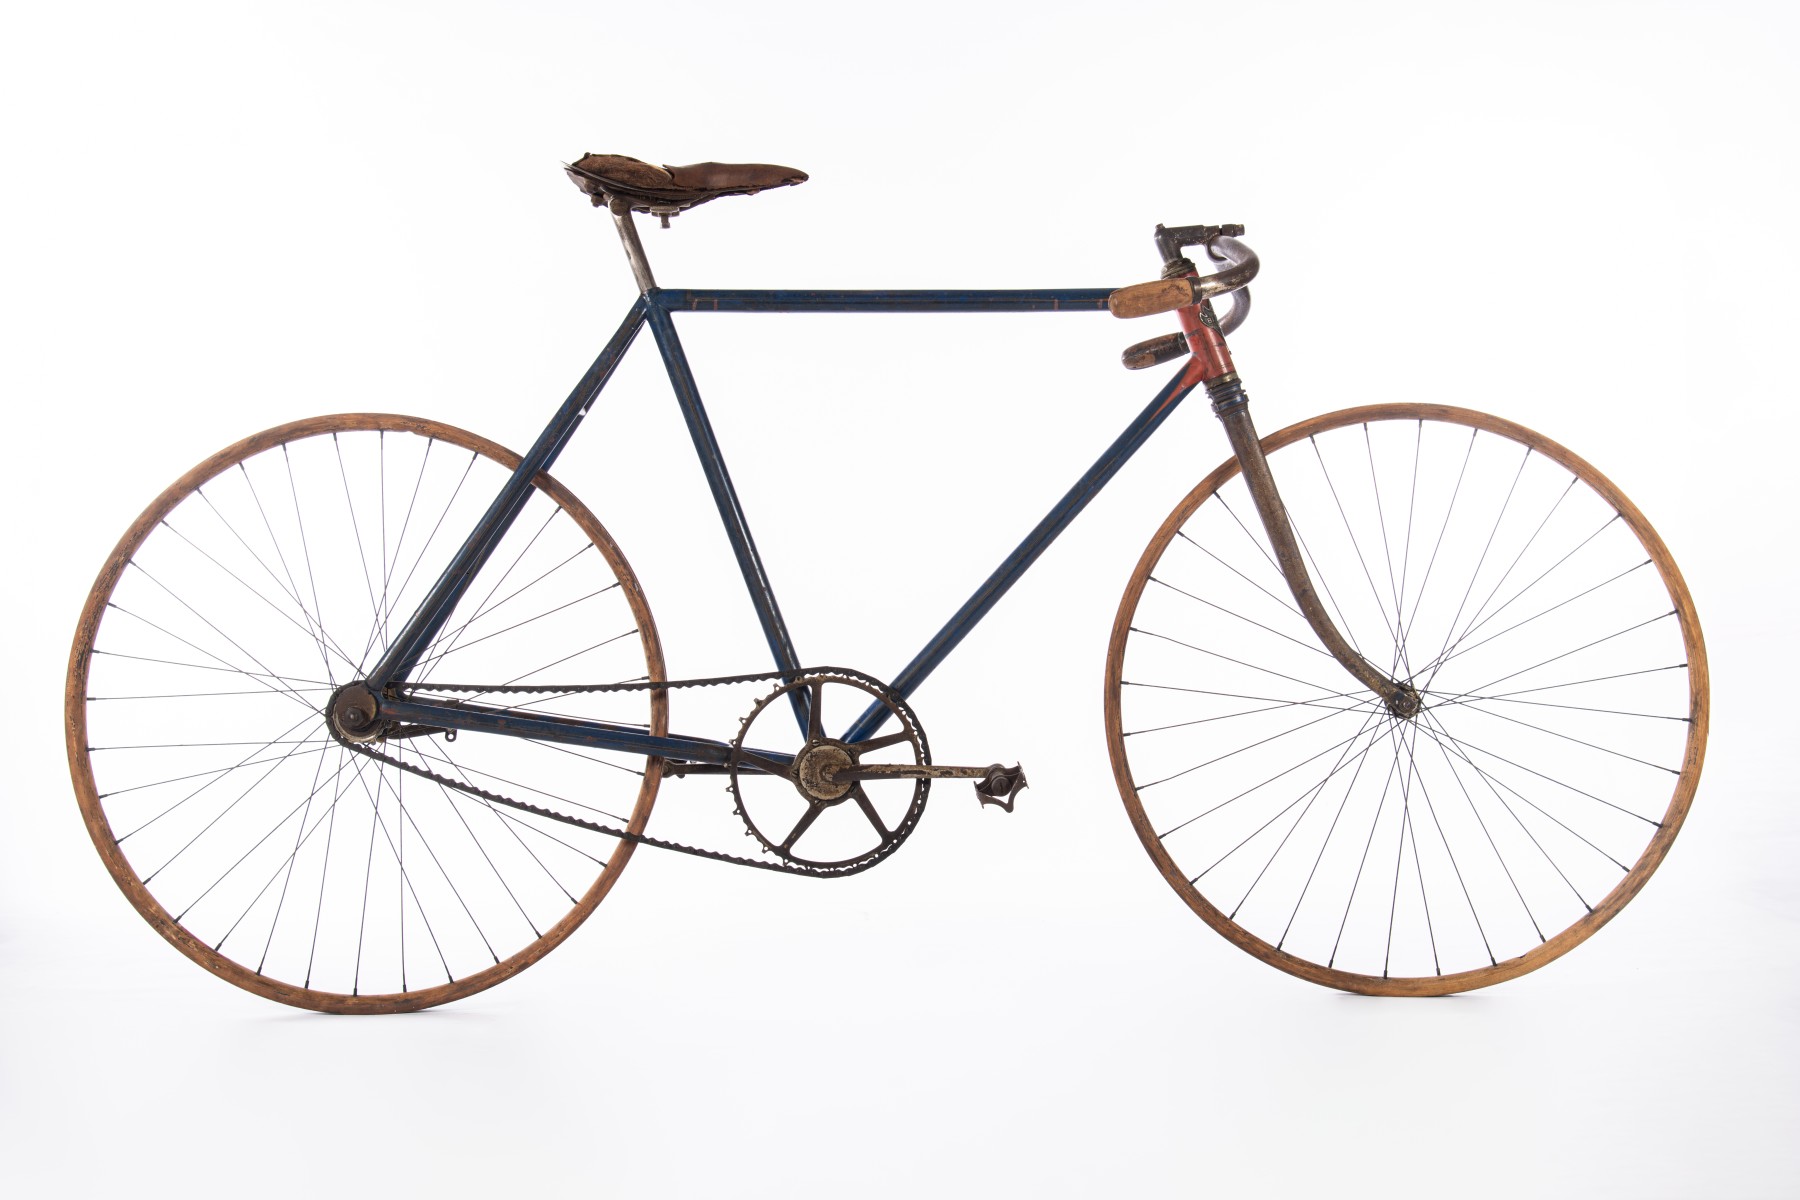 Track bicycle made by Black Diamond, 1902